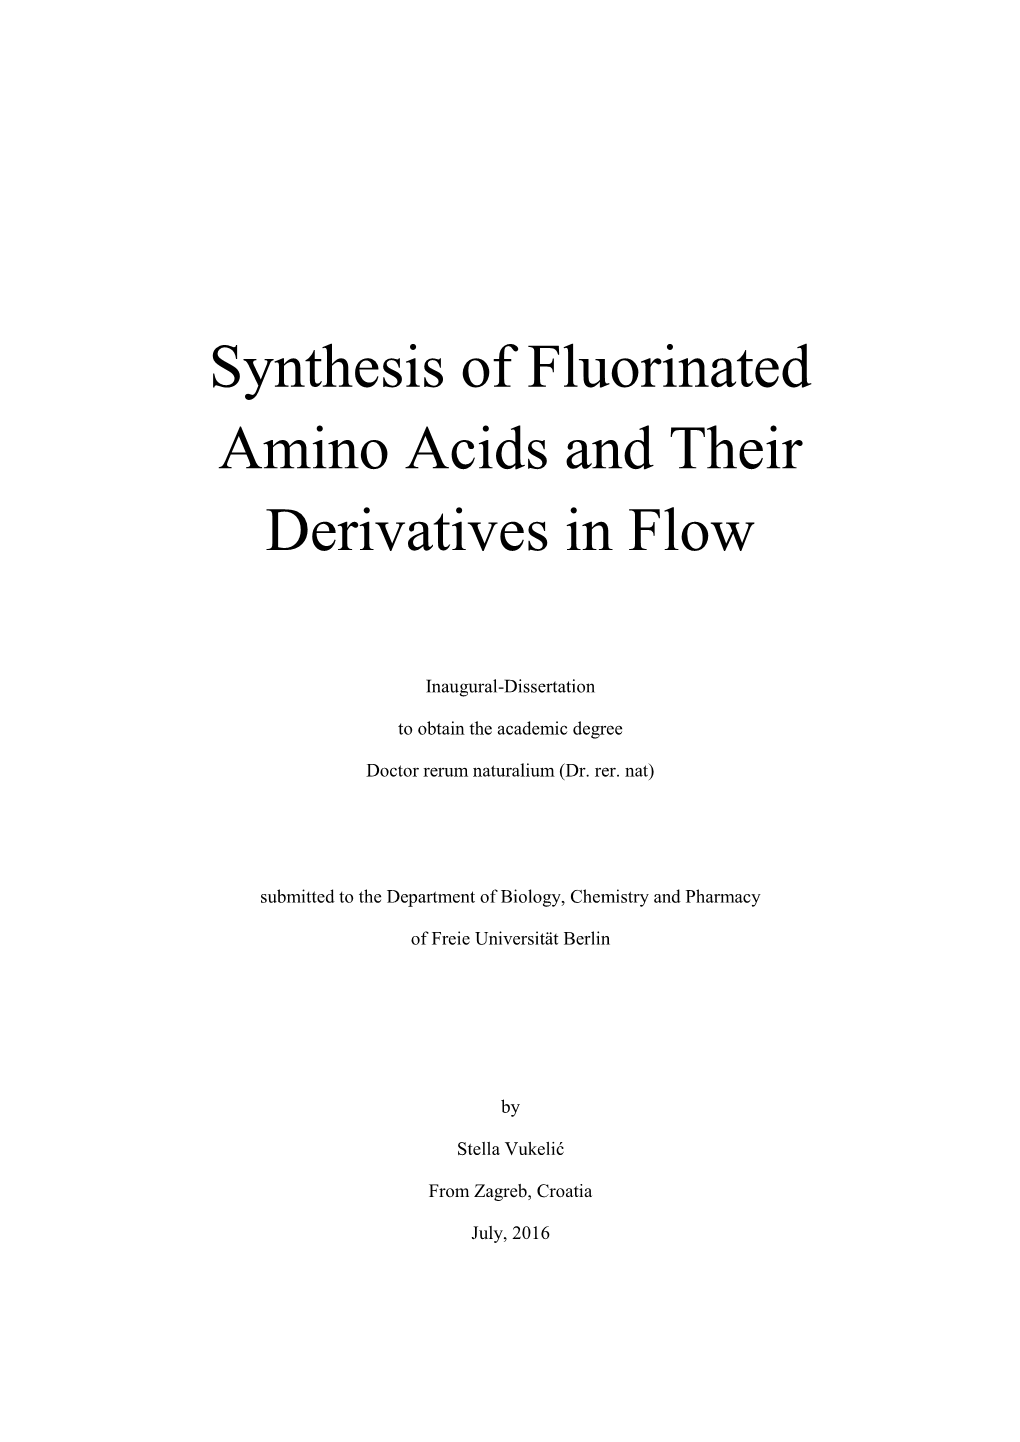 Synthesis of Fluorinated Amino Acids and Their Derivatives in Flow